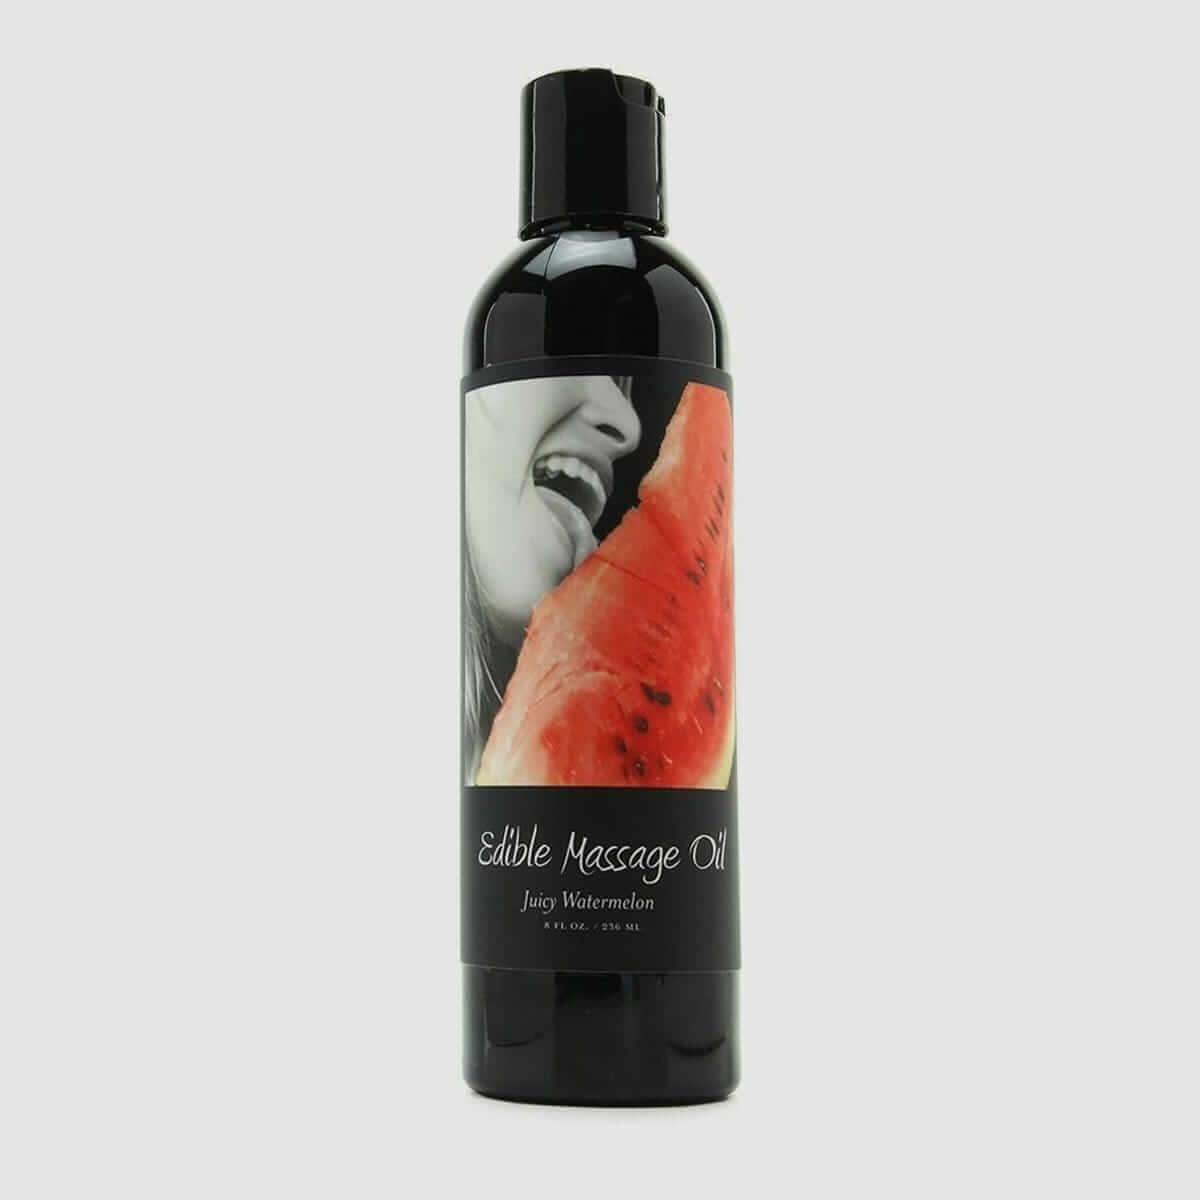 Earthly Body Edible Massage Oil - Watermelon, 8oz/236ml - Thorn & Feather Sex Toy Canada